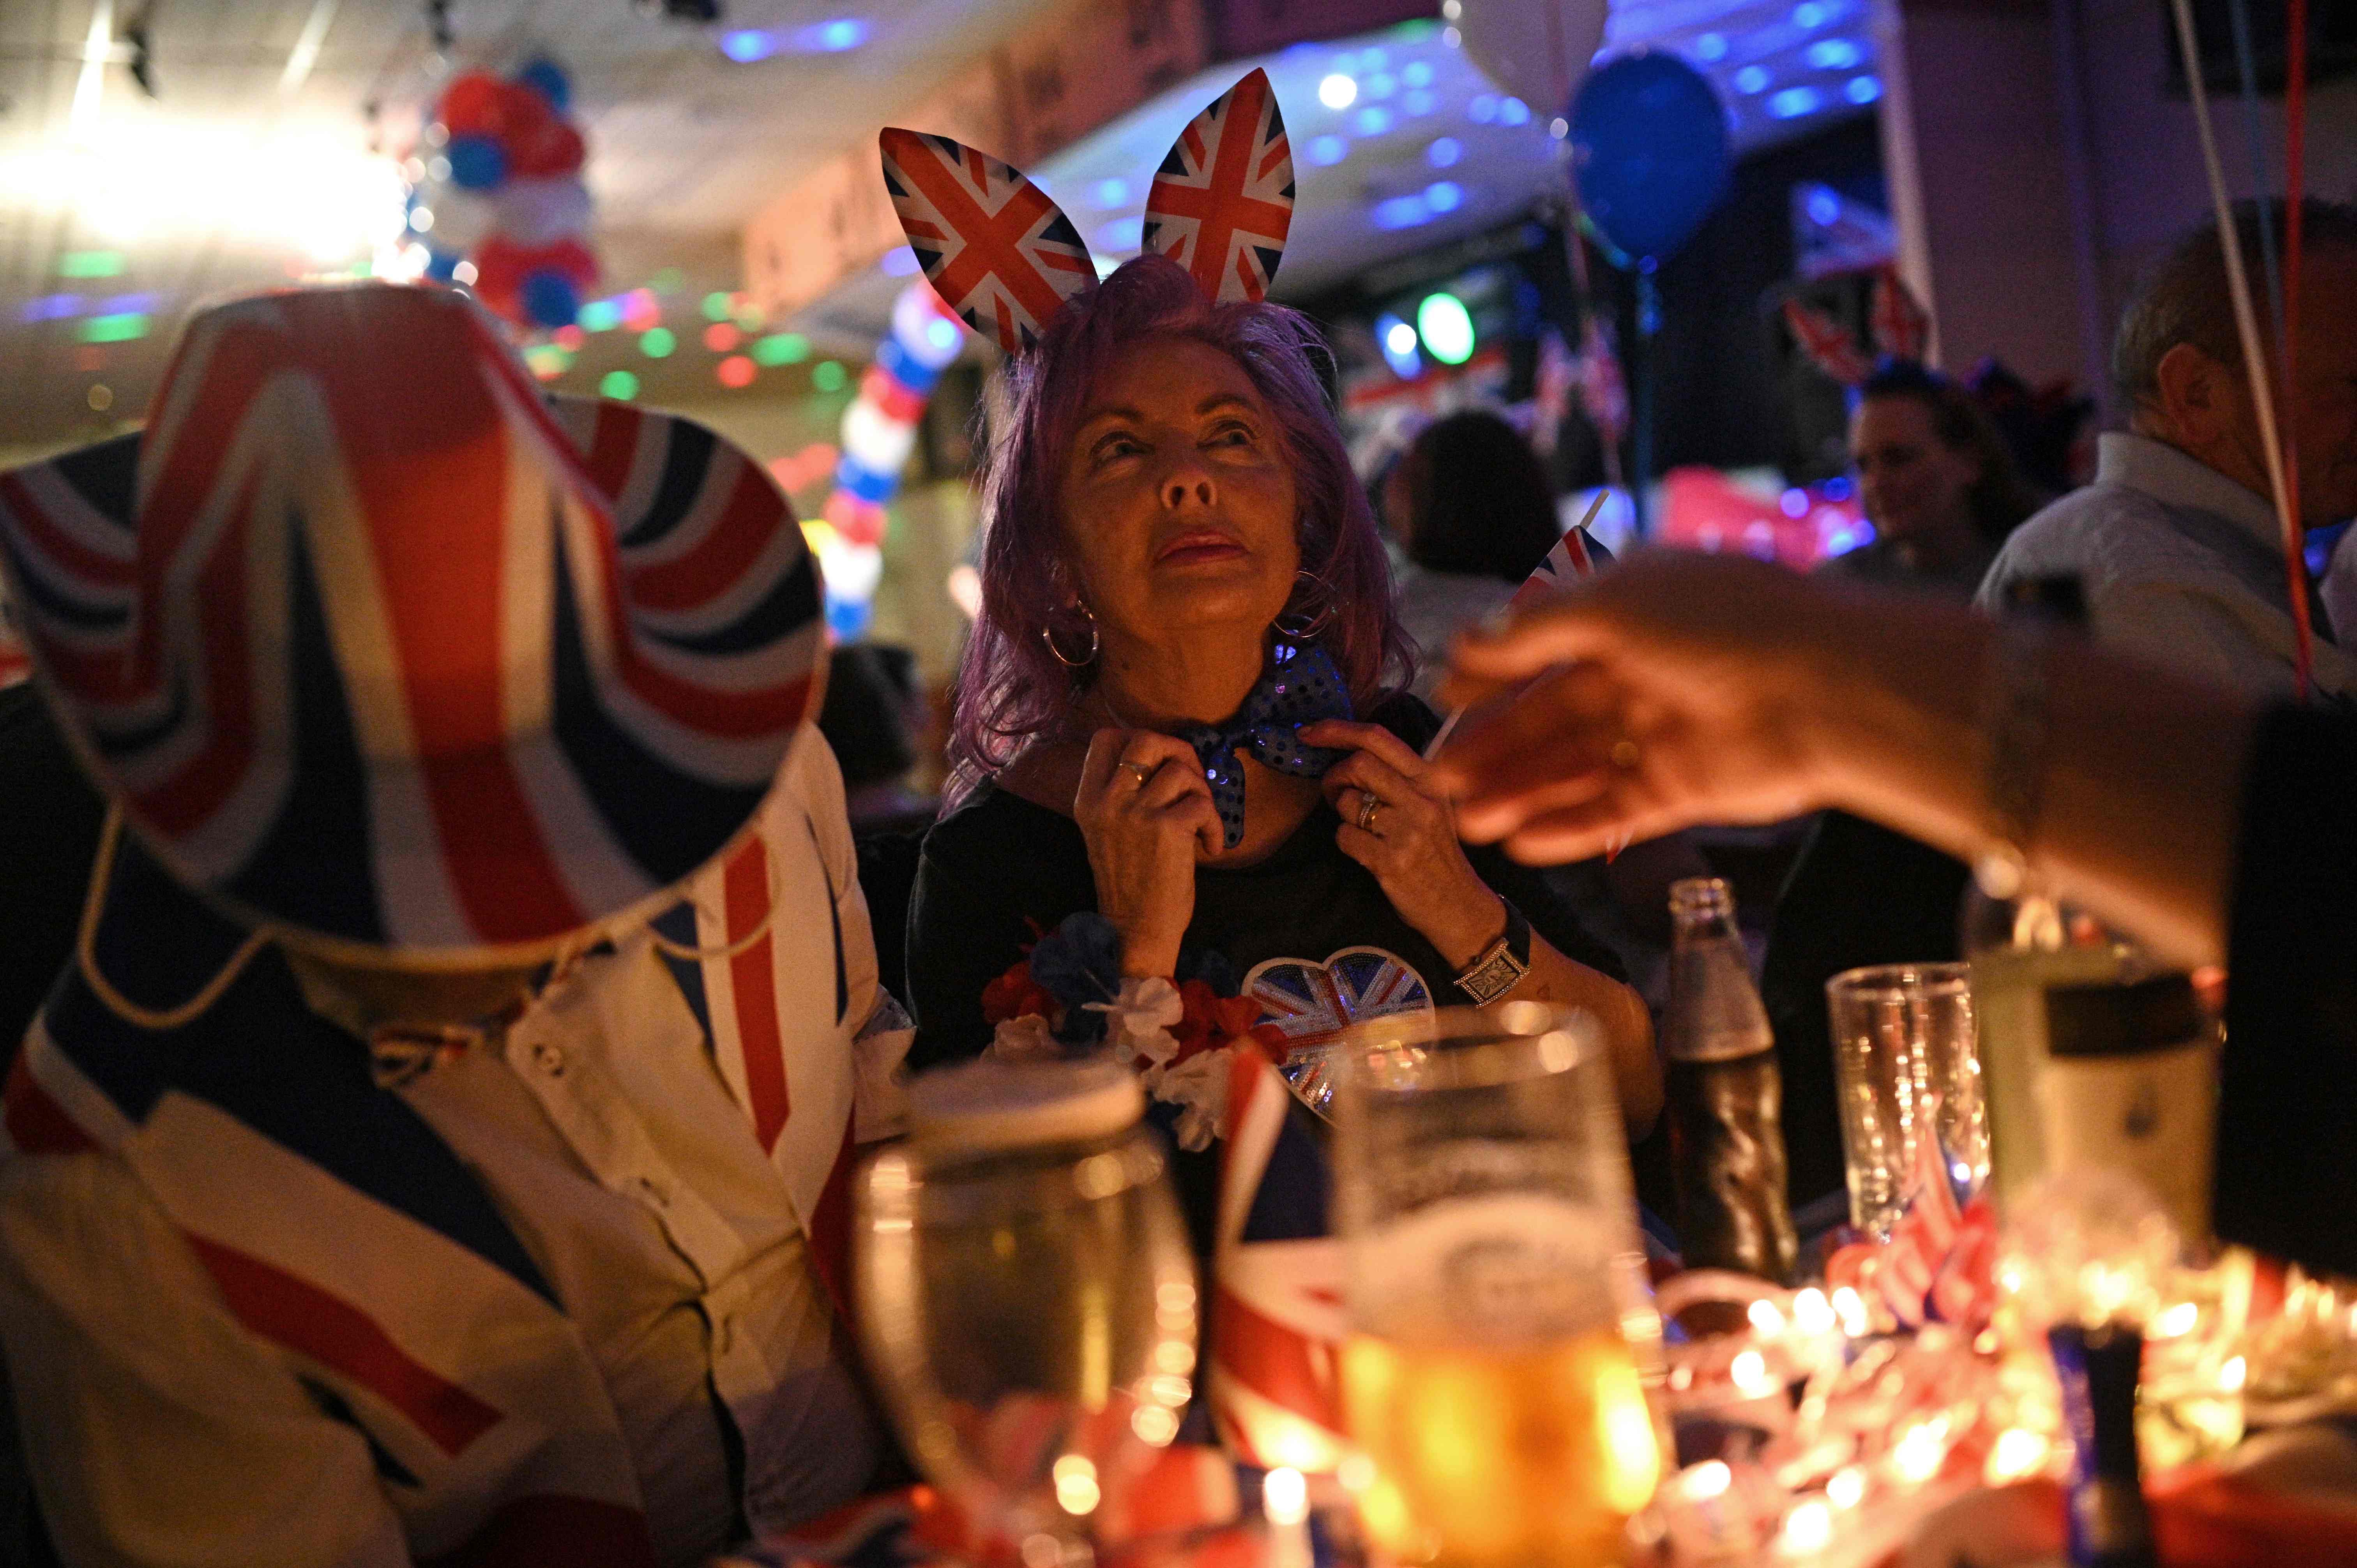 Brexit supporters gather for a Brexit Celebration party at Woolston Social Club in Warrington, north west England. (AFP Photo)